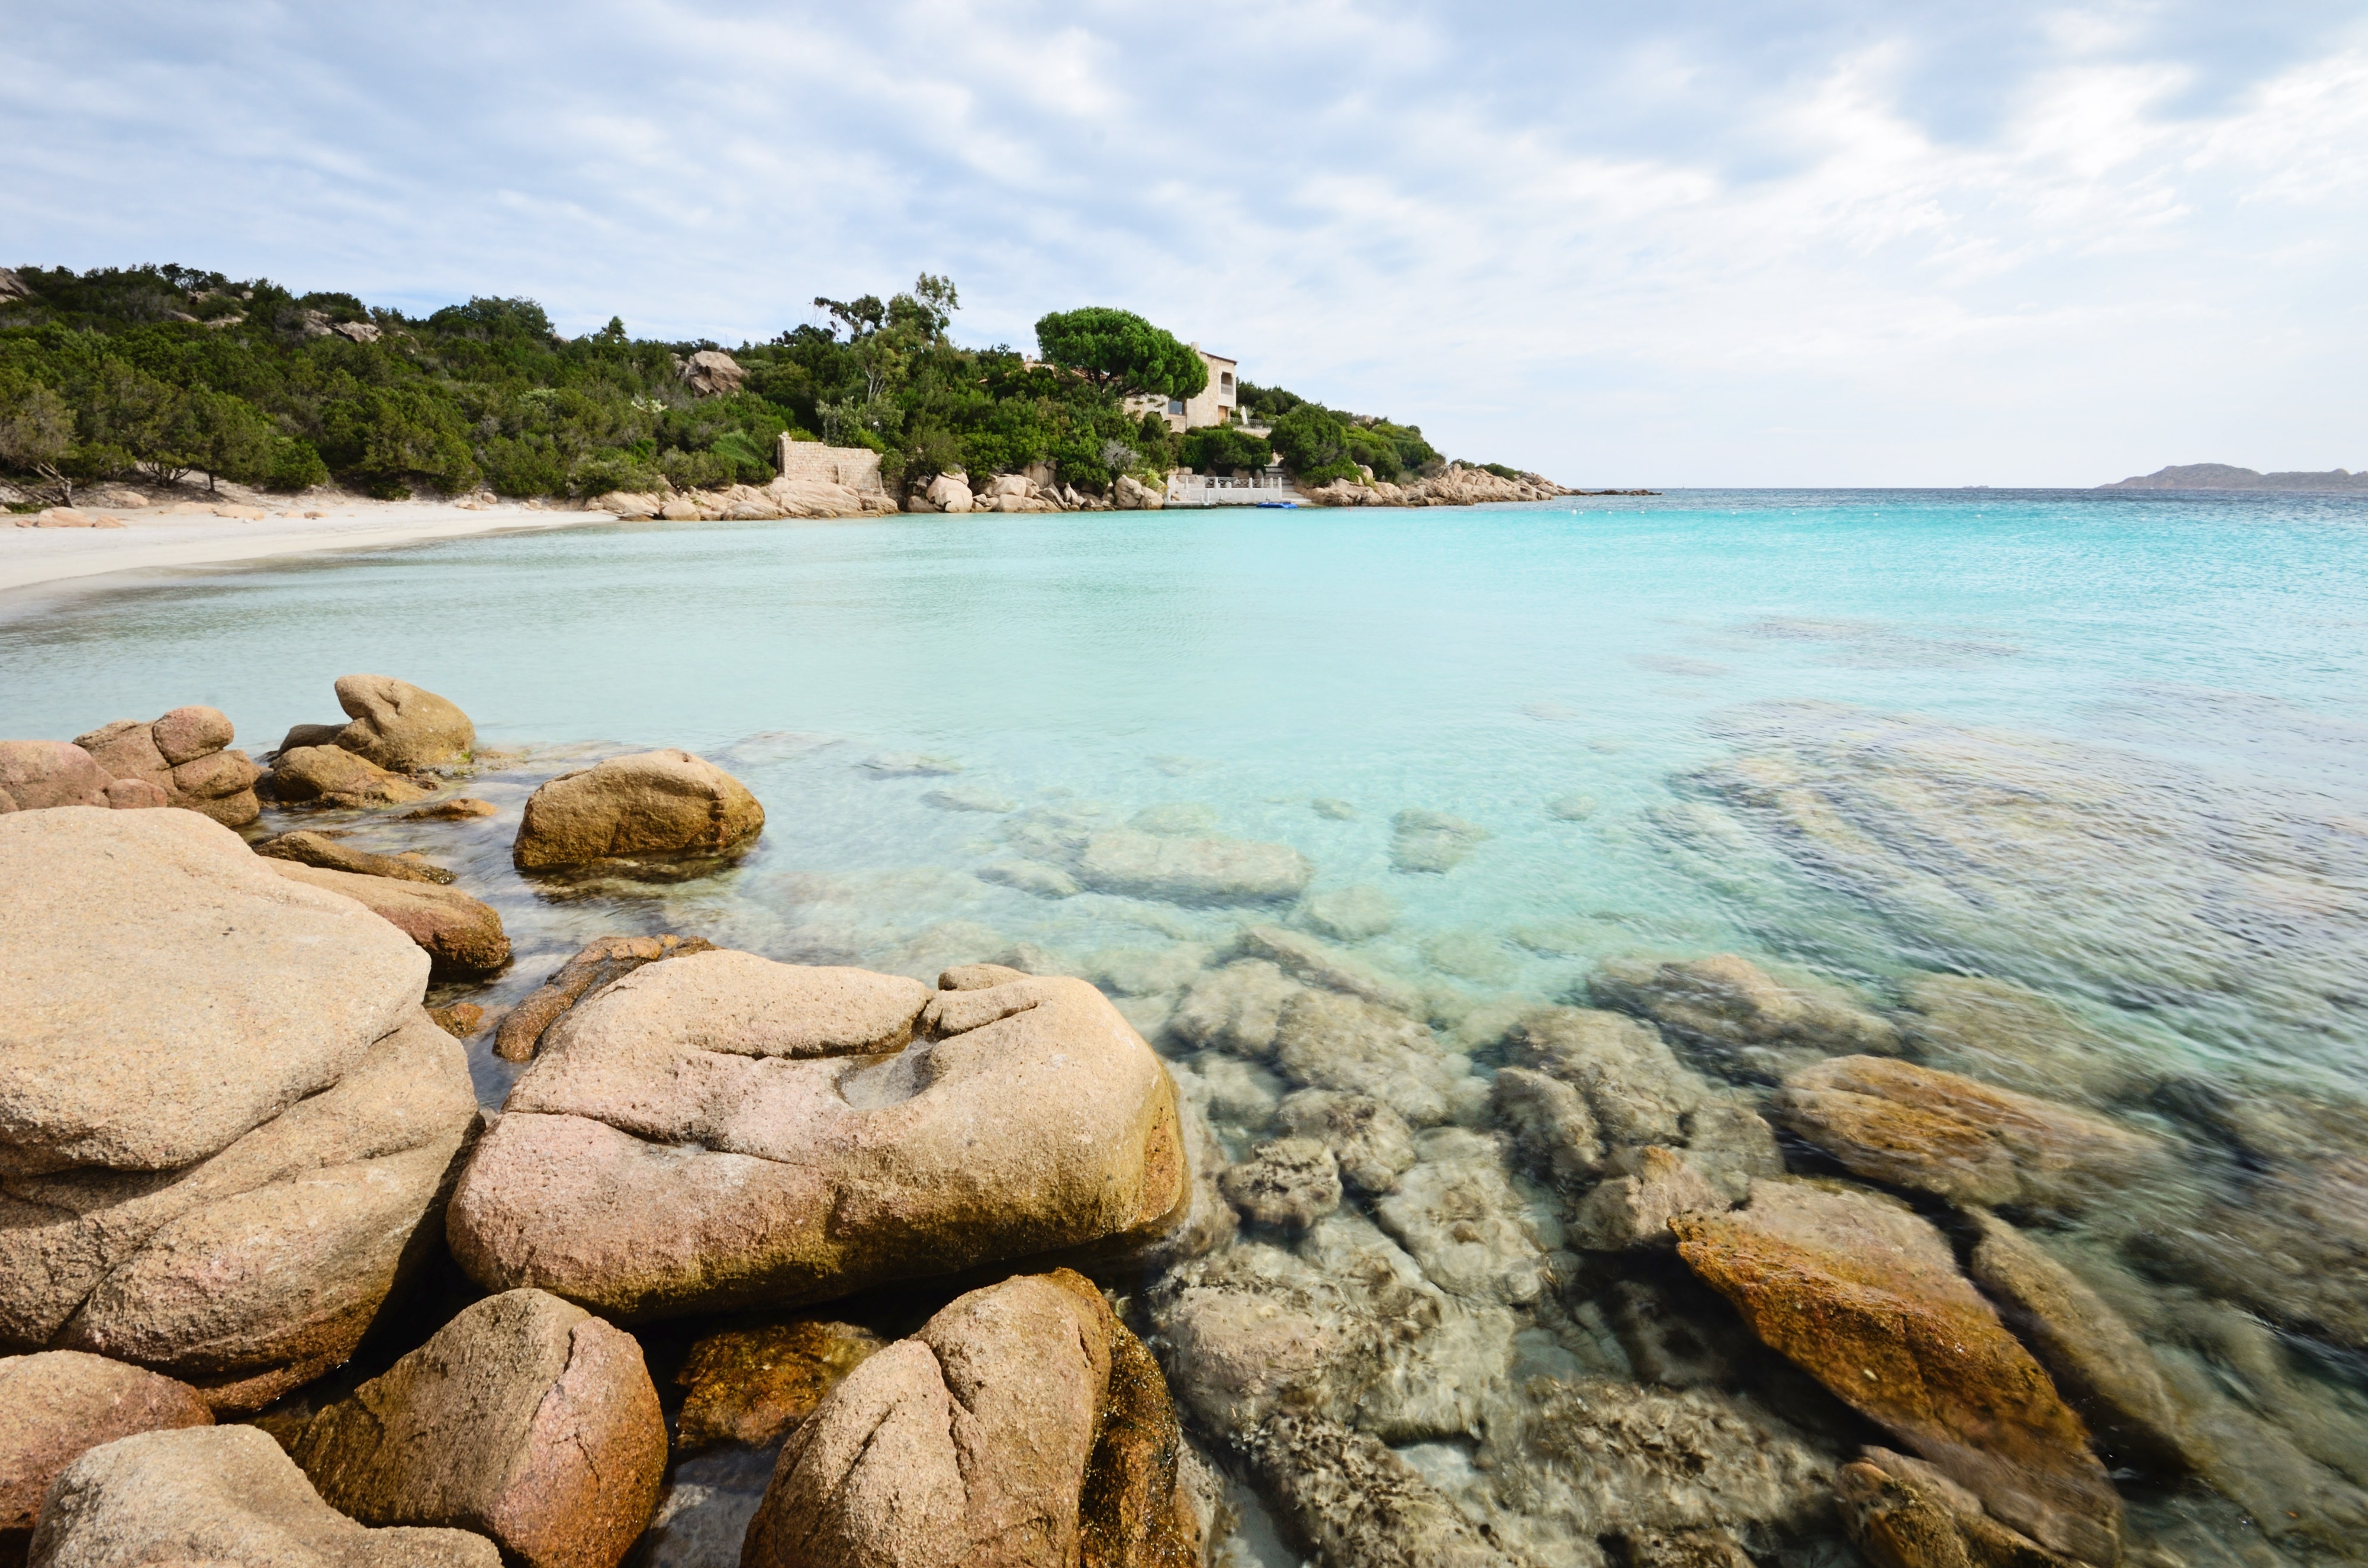 <p>This winsome beach occupies a teensy-tiny piece of Sardinia’s Costa Smeralda, one of the most beautiful—and most expensive—stretches of coastline in all of Italy; in the mid-2010s, real estate prices reached up to $40,000 per square foot. This sandy spot is famous for its Bermuda-blue water and the glamorous resort overlooking it, the <a href="https://cna.st/affiliate-link/d5Zy5wnNZ5WxtxdHZTNmyXgVyynEqsfKLx52jHGjd4gLhnVsj3F1kRYdPhLUbipiZPWS8Hn38B48LtgYr3DxZ1TBjXdCb6EHKhMbc14bcfAecdosb2AACNhX89G2AU9HFyh6f5CwjCczhZGeSpsxXBQZTfLKQACK8DHWK896P5UxwDsWbE3LMyMfAbnGeYqha1n" rel="sponsored">Cala di Volpe, a Luxury Collection Hotel, Costa Smeralda</a>, but the waters are open to the public, and you don’t need to be a guest of the hotel to swim there.</p> <p>If you can’t find a spot for your beach blanket though, there are <em>molte altre spiagge</em> in the area. Nearby Romazzino has a gorgeous bunch of them—and while you’re in the neighborhood, you can check into the newly reimagined <a href="https://www.expedia.com/Arzachena-Hotels-Romazzino.h24461.Hotel-Information">Romazzino, a Belmond Hotel, Costa Smeralda</a> is opening this summer. Get to the Costa Smeralda by flying or ferrying into Olbia, and renting a car to check out all the stunning resort towns that dot this end of Sardinia.</p><p>Sign up to receive the latest news, expert tips, and inspiration on all things travel</p><a href="https://www.cntraveler.com/newsletter/the-daily?sourceCode=msnsend">Inspire Me</a>